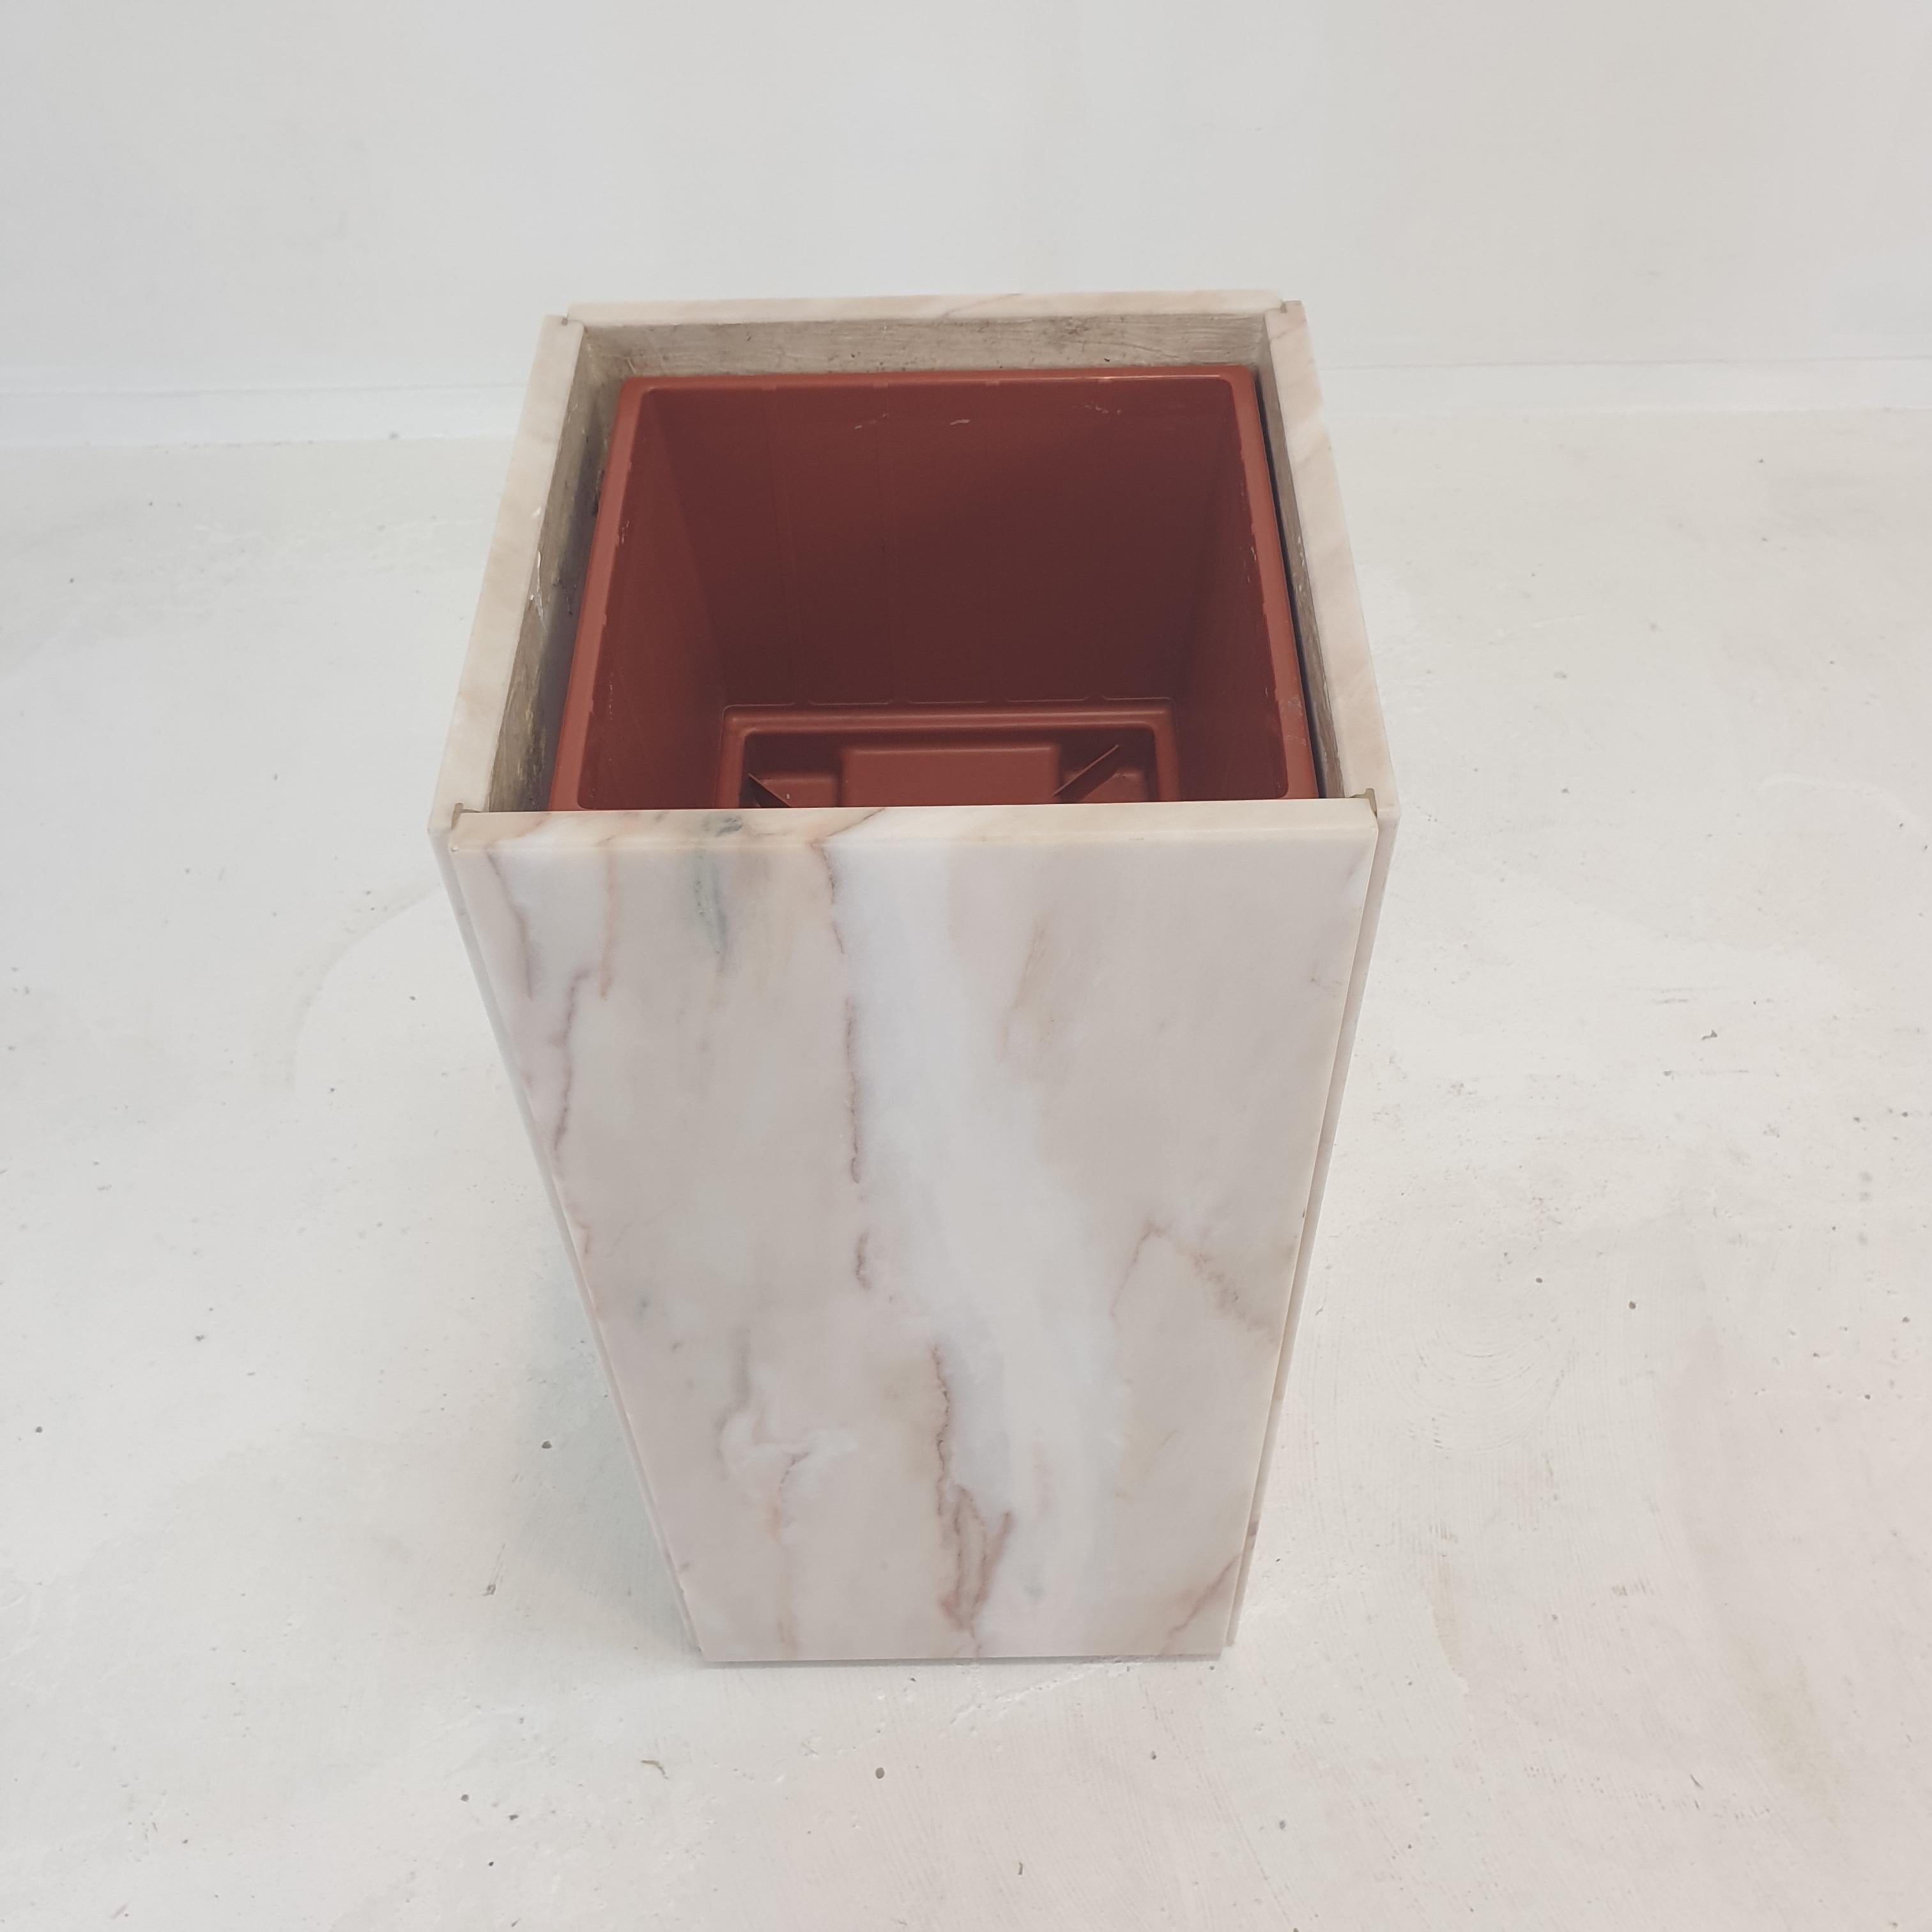 Italian Marble Planter or Pedestal with Light, 1970's For Sale 3